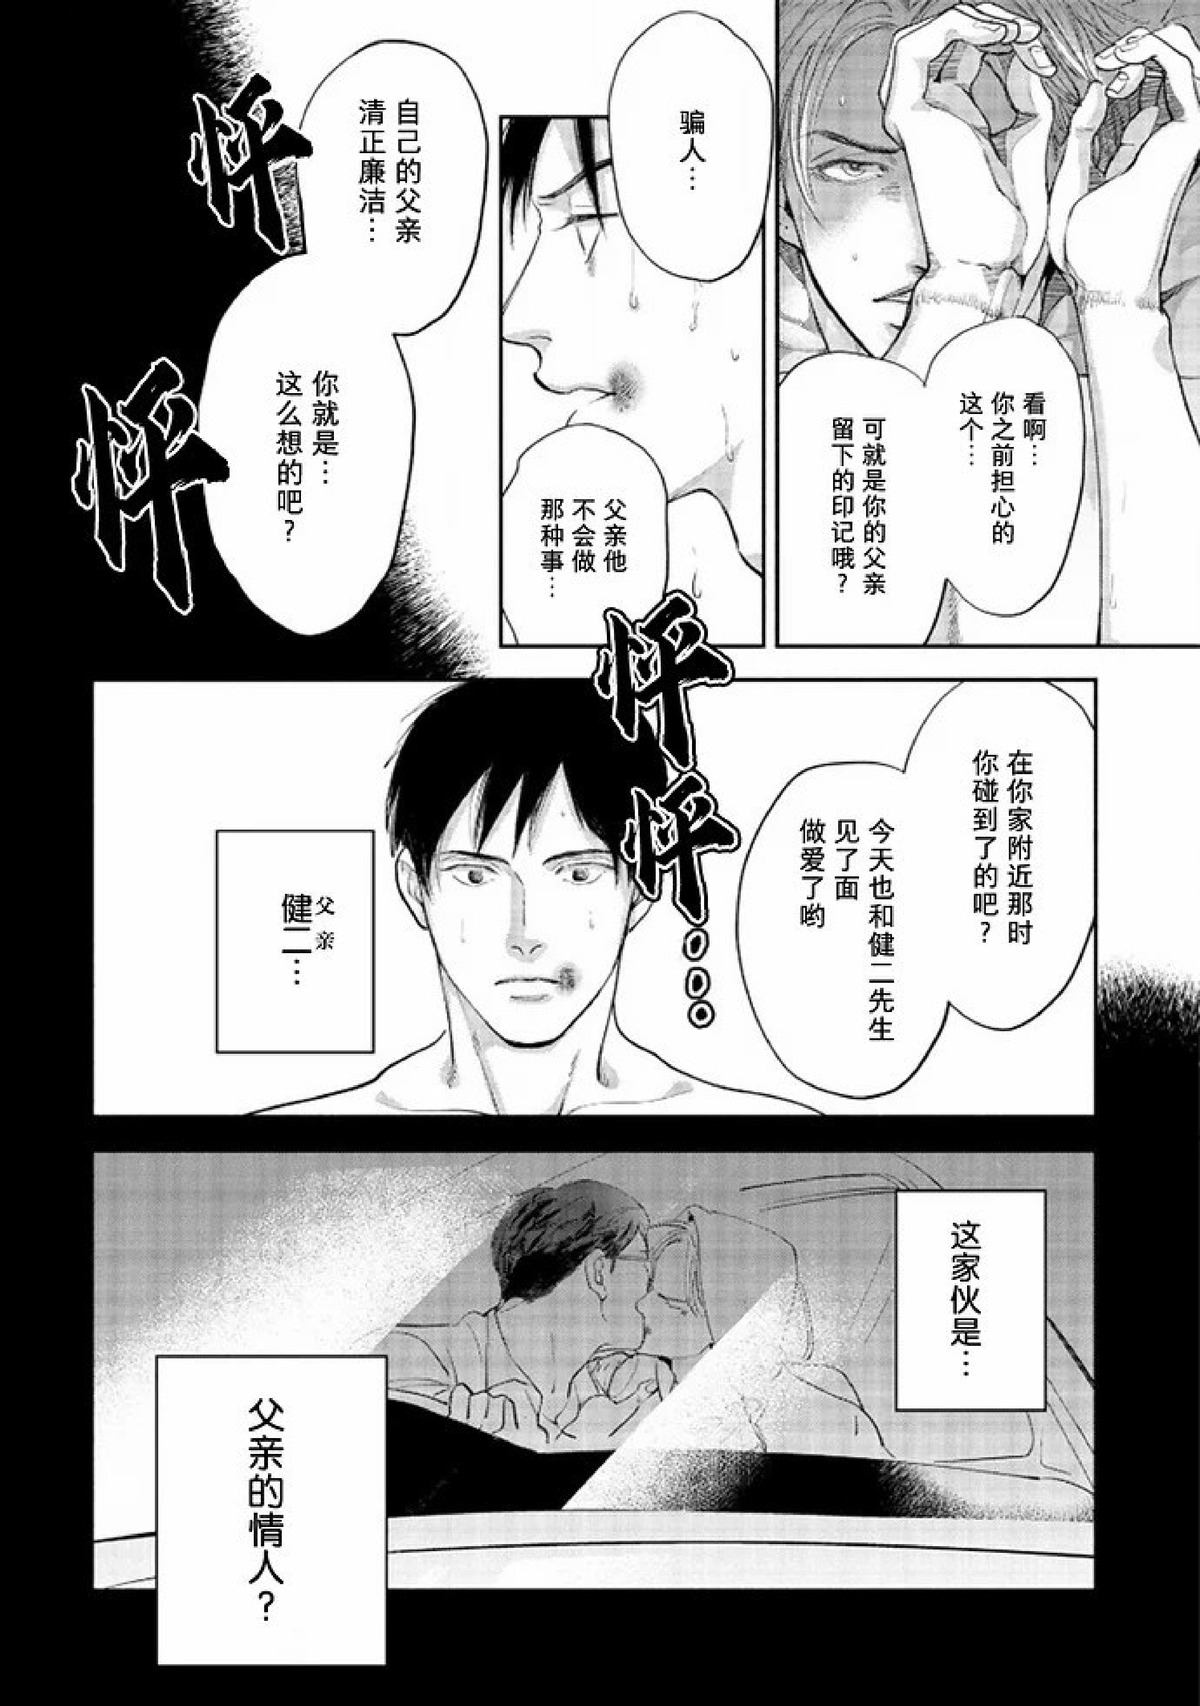 【Two sides of the same coin[腐漫]】漫画-（上卷01-02）章节漫画下拉式图片-102.jpg